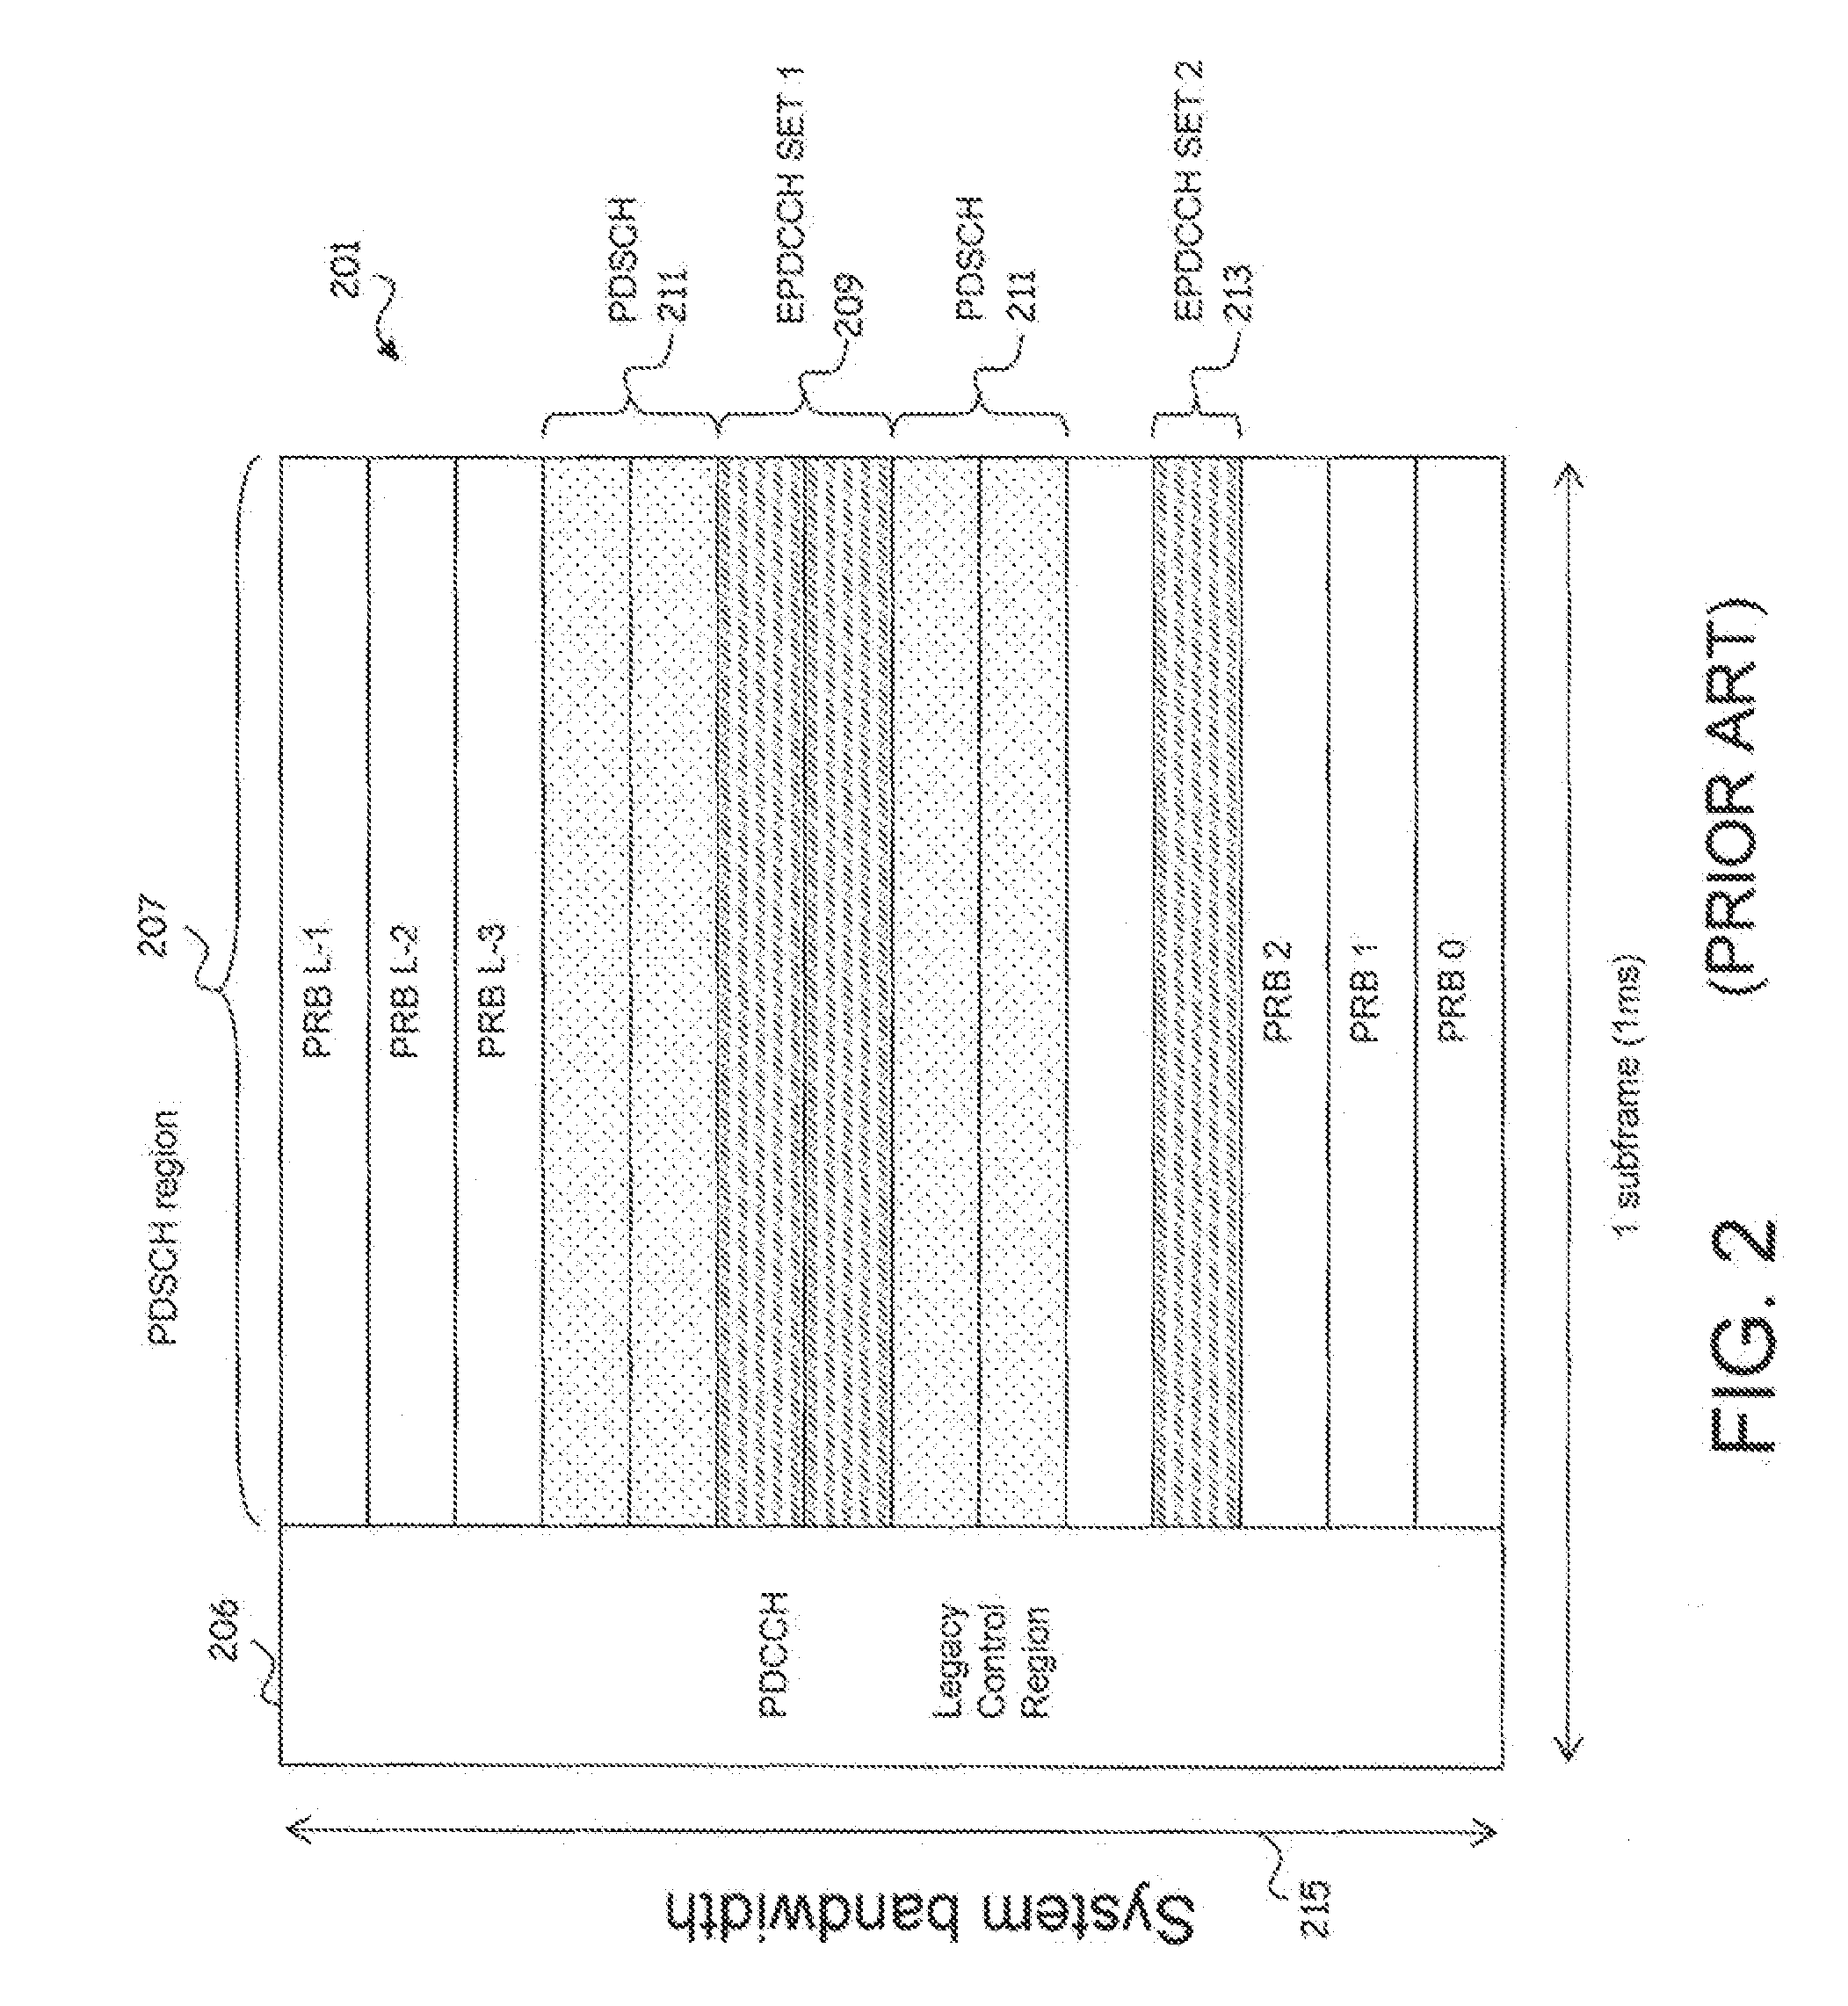 Enhanced downlink control channel configuration for LTE